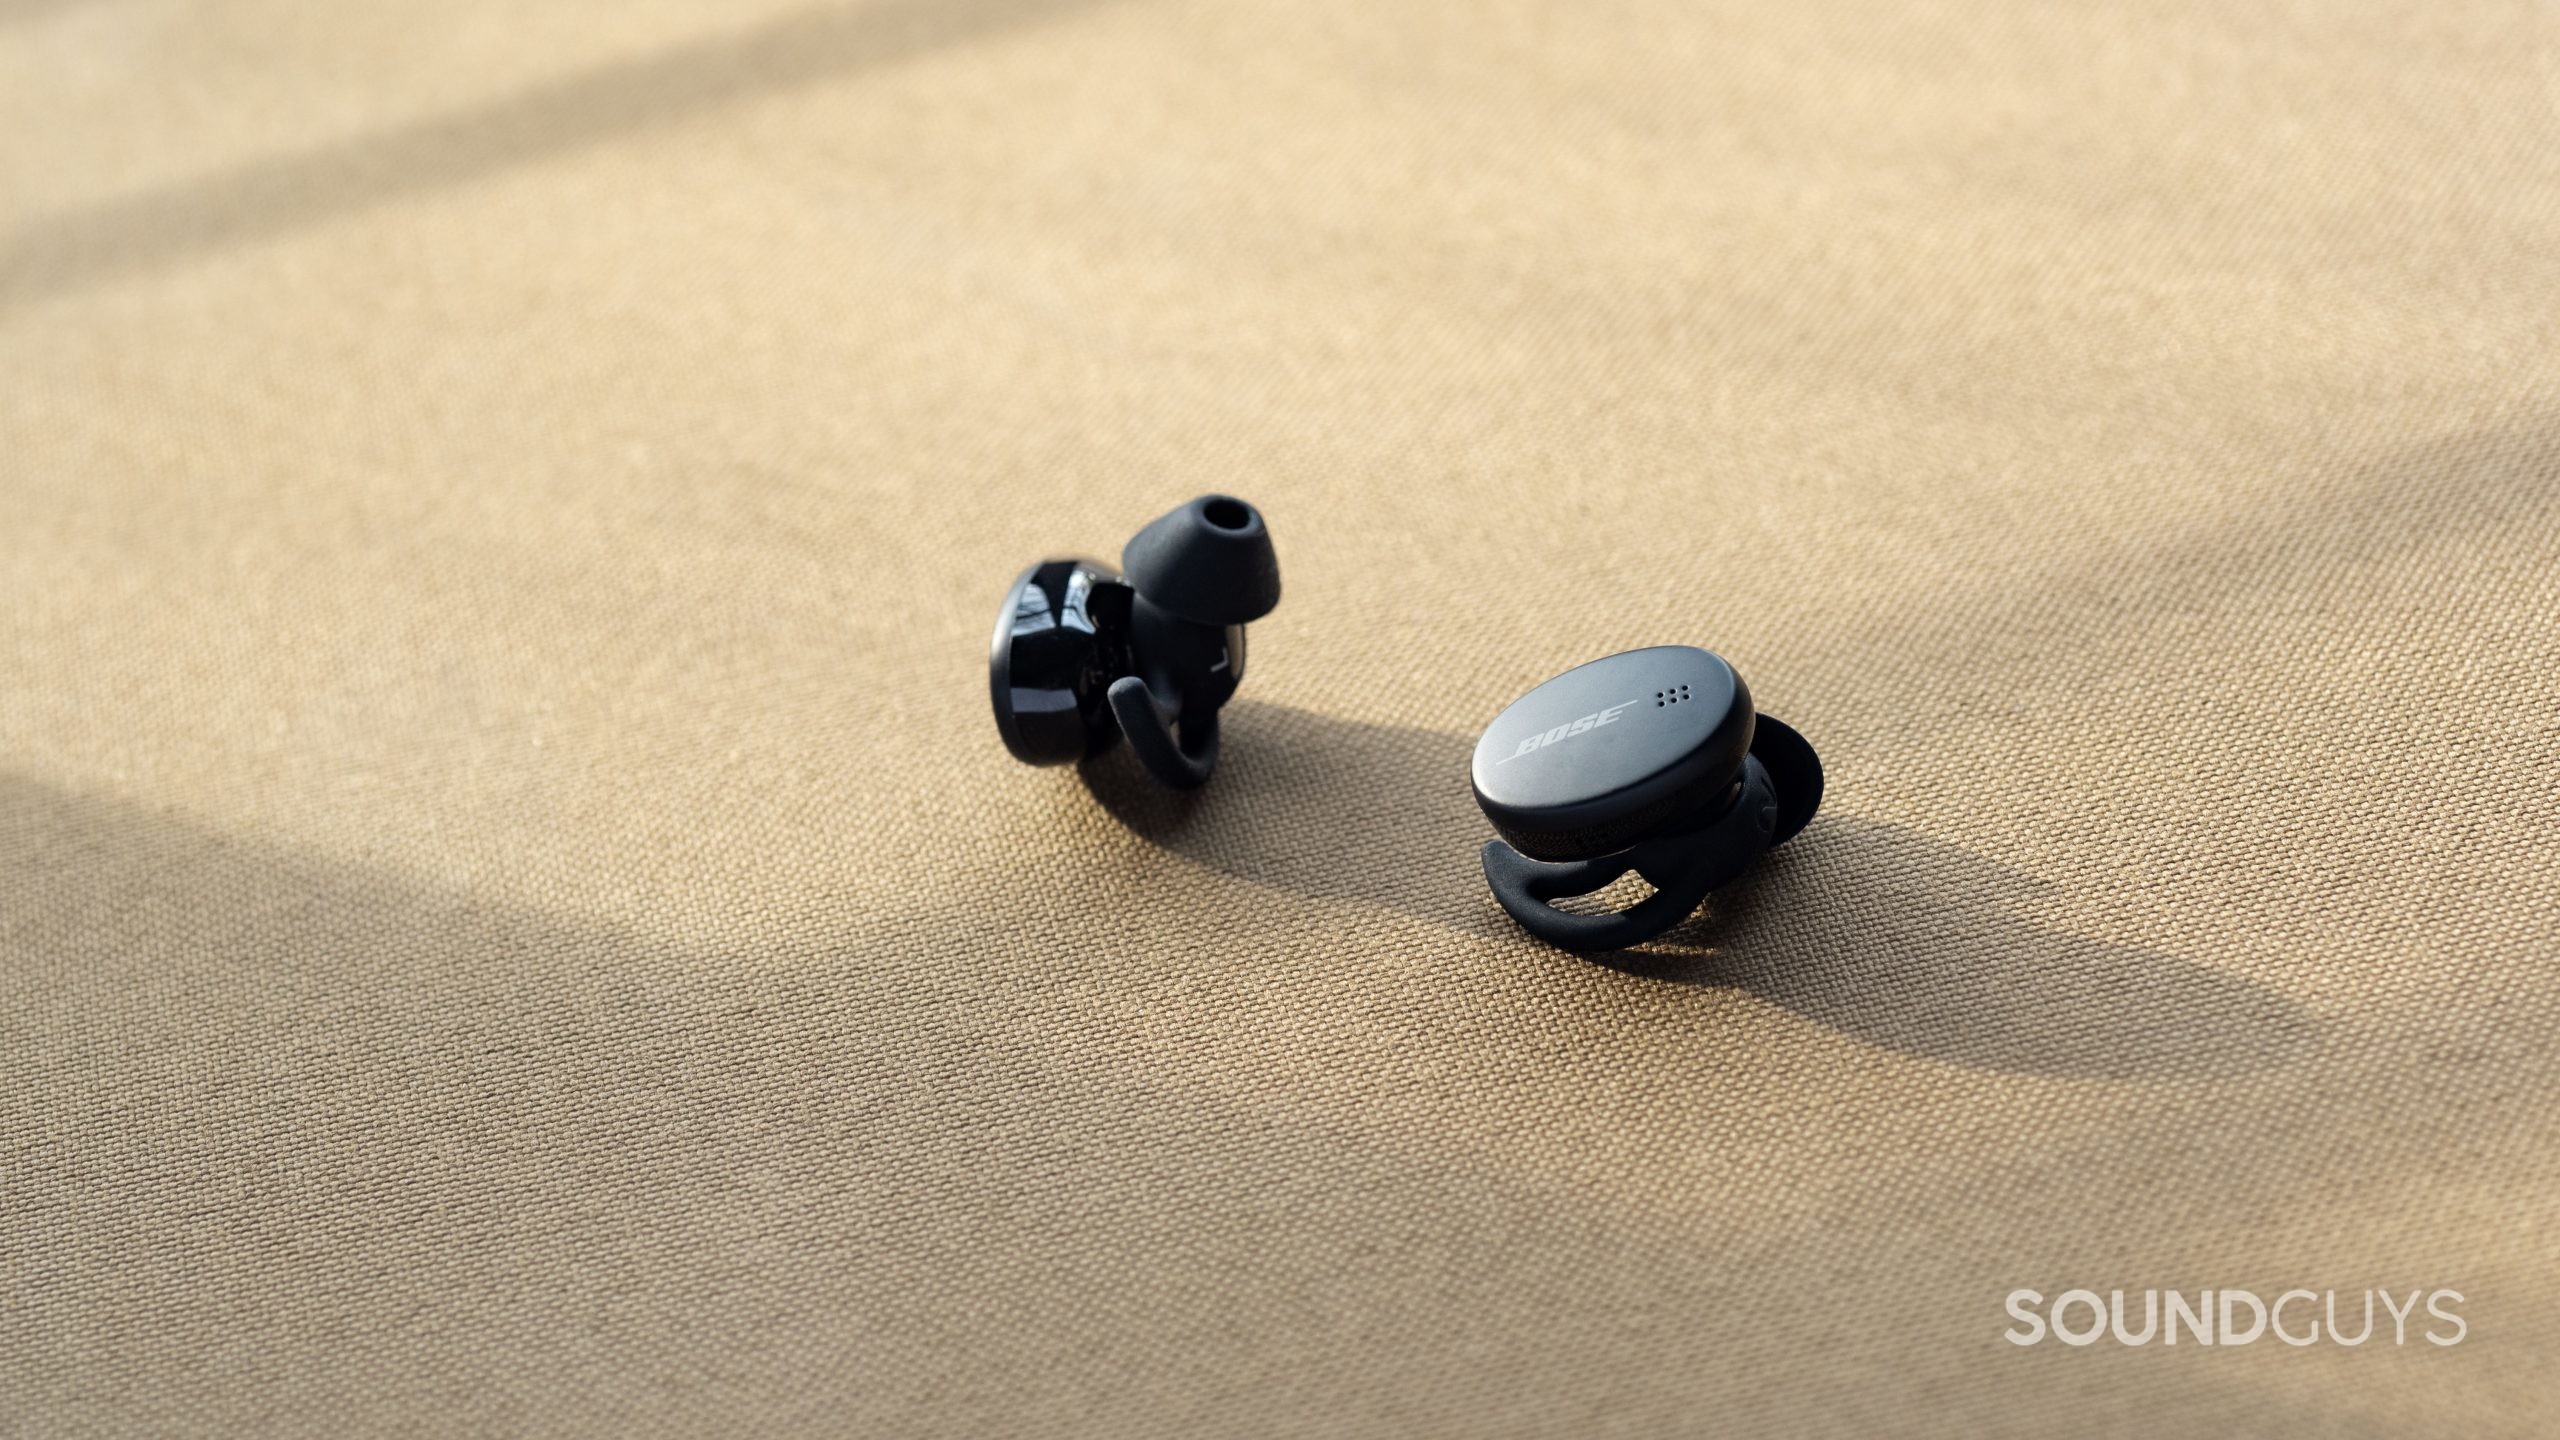 The Bose Sport Earbuds true wireless workout earbuds StayHear Max ear tips in view; the buds are against a beige background.